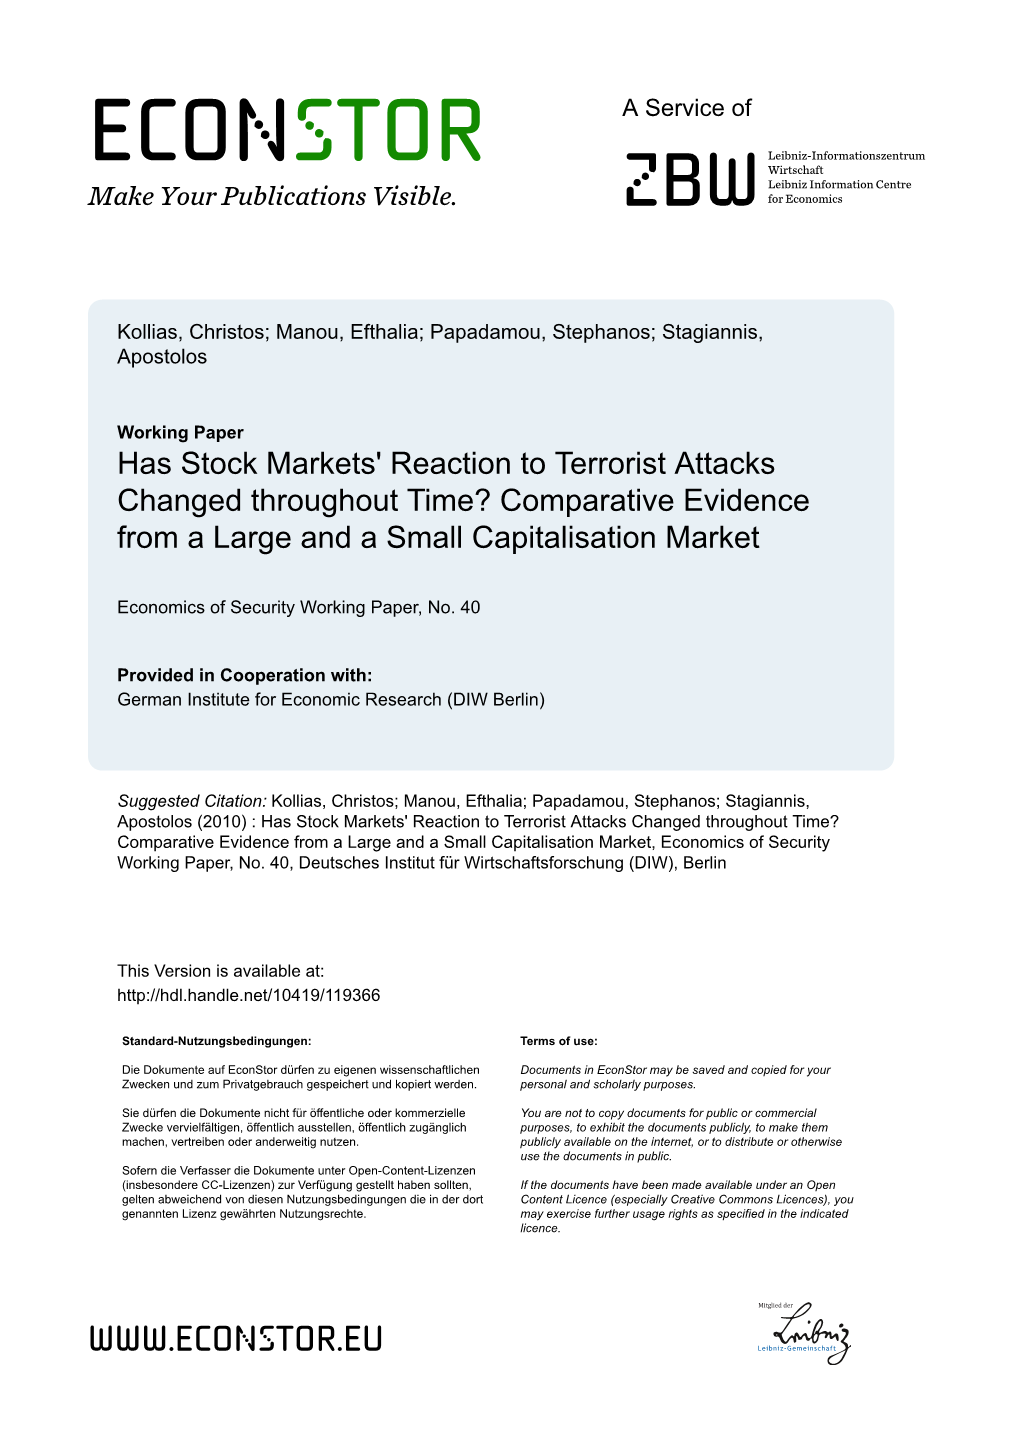 Has Stock Markets' Reaction to Terrorist Attacks Changed Throughout Time? Comparative Evidence from a Large and a Small Capitalisation Market